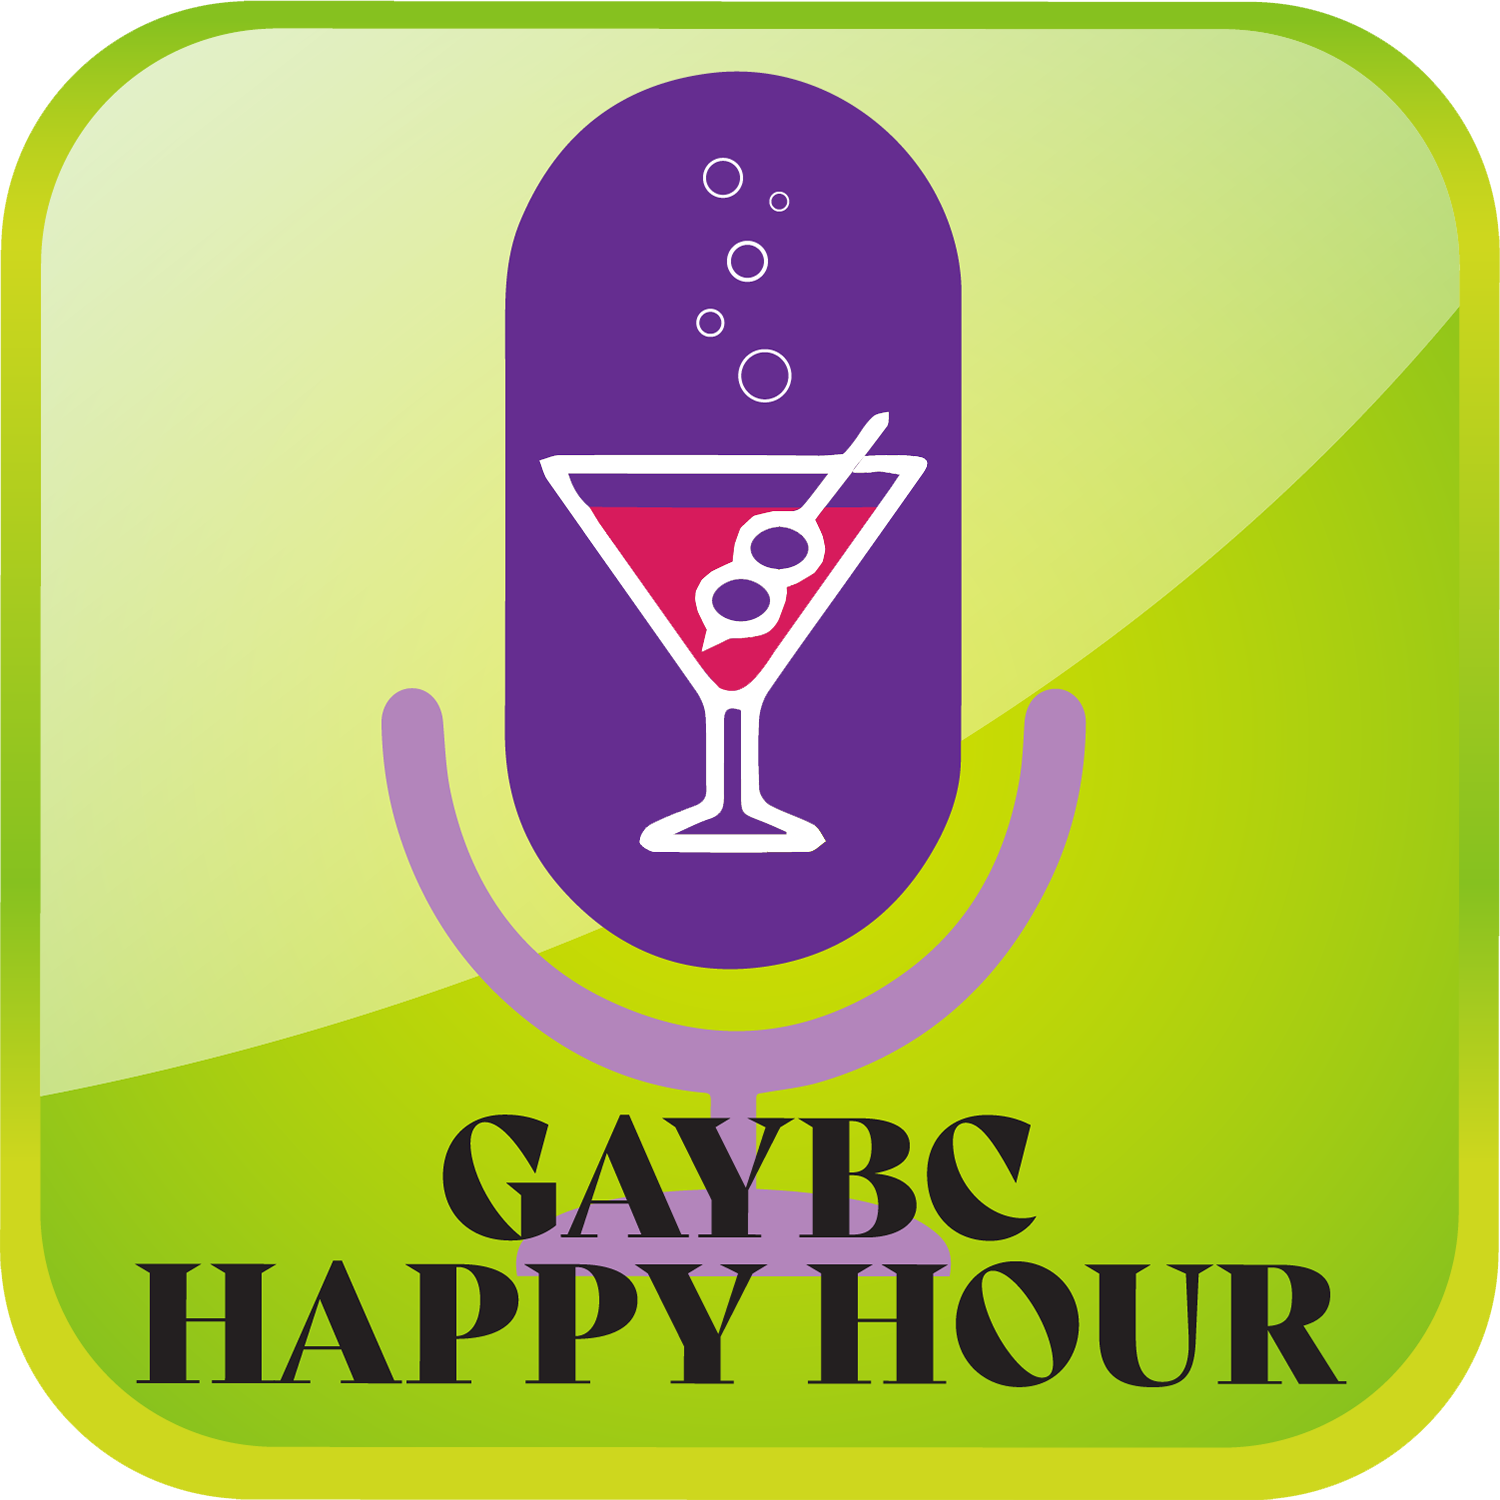 Show artwork for GAYBC Happy Hour